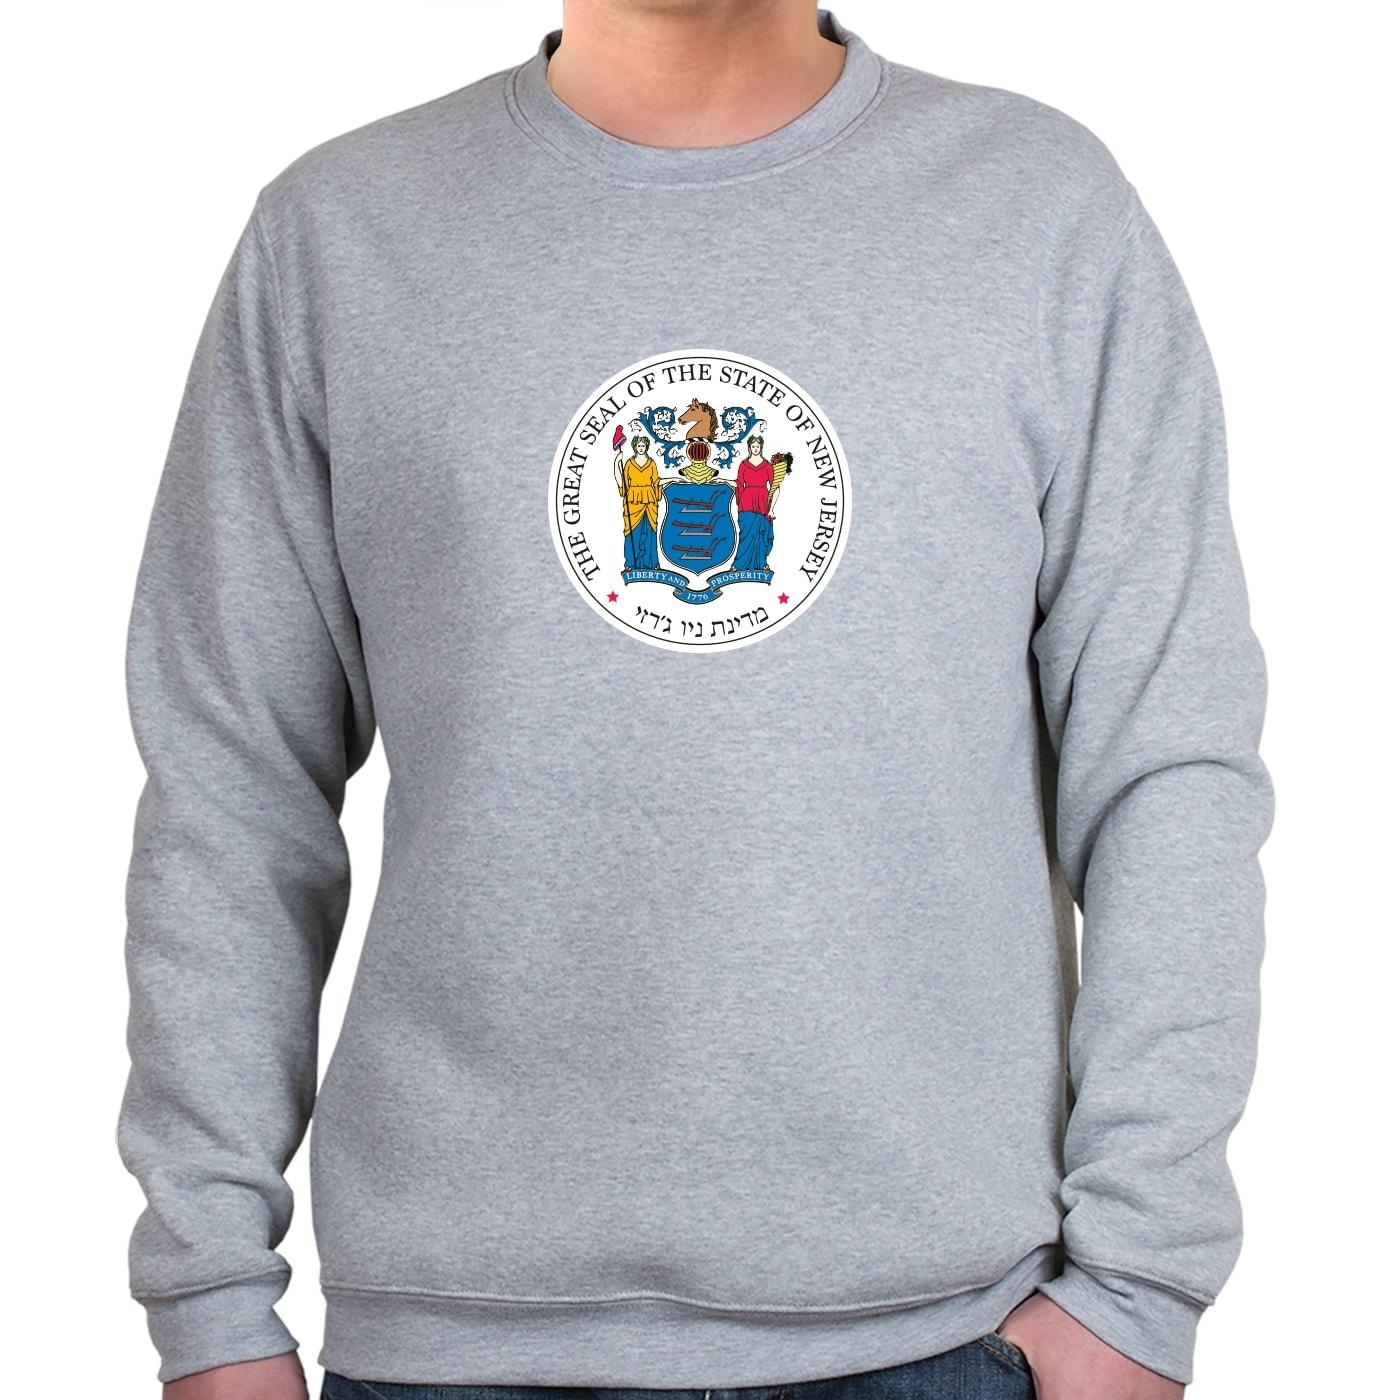 State of New Jersey Sweatshirt (Choice of Colors) - 1